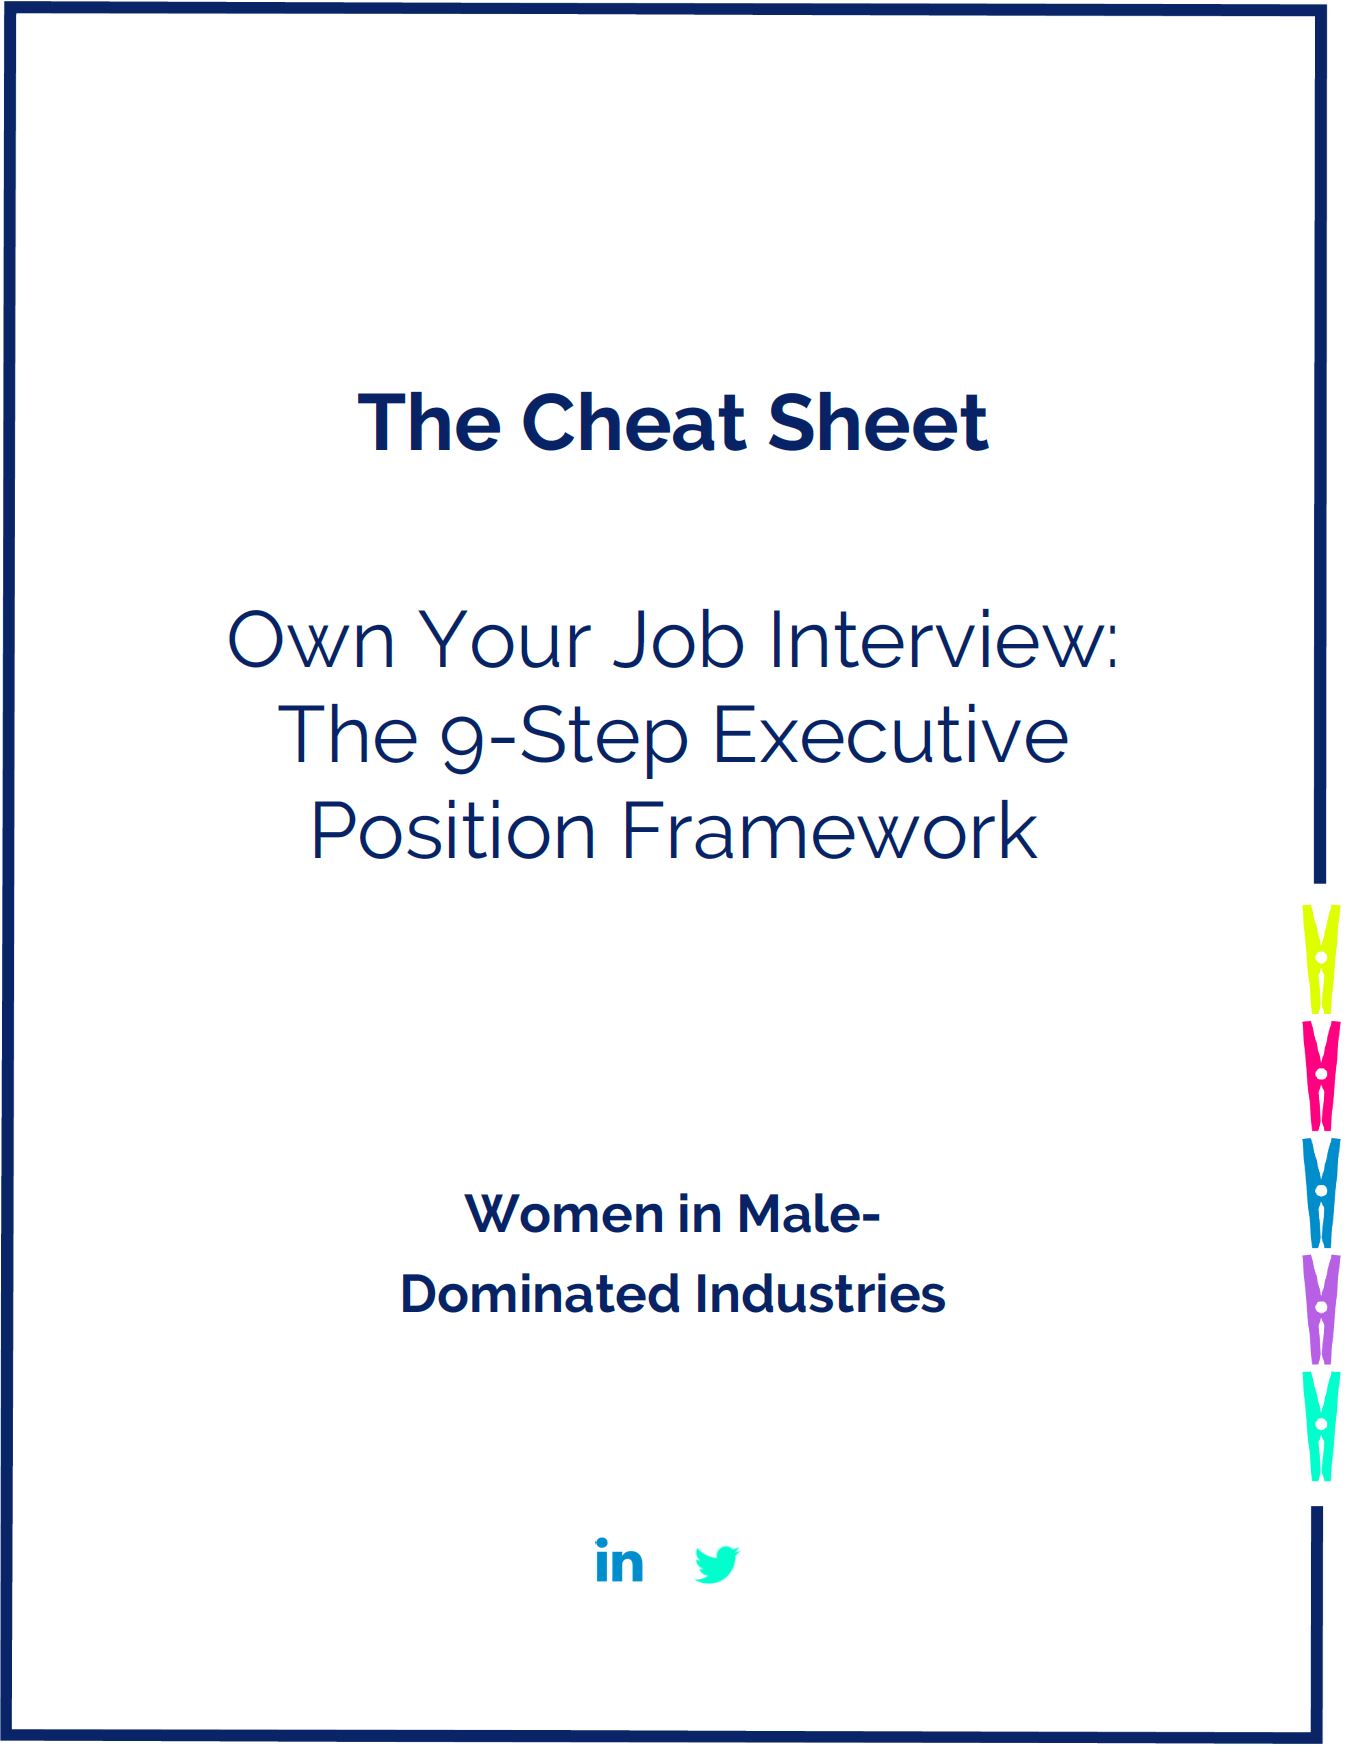 Own Your Interview: The 9-Step Executive Position Framework for Job Interviews